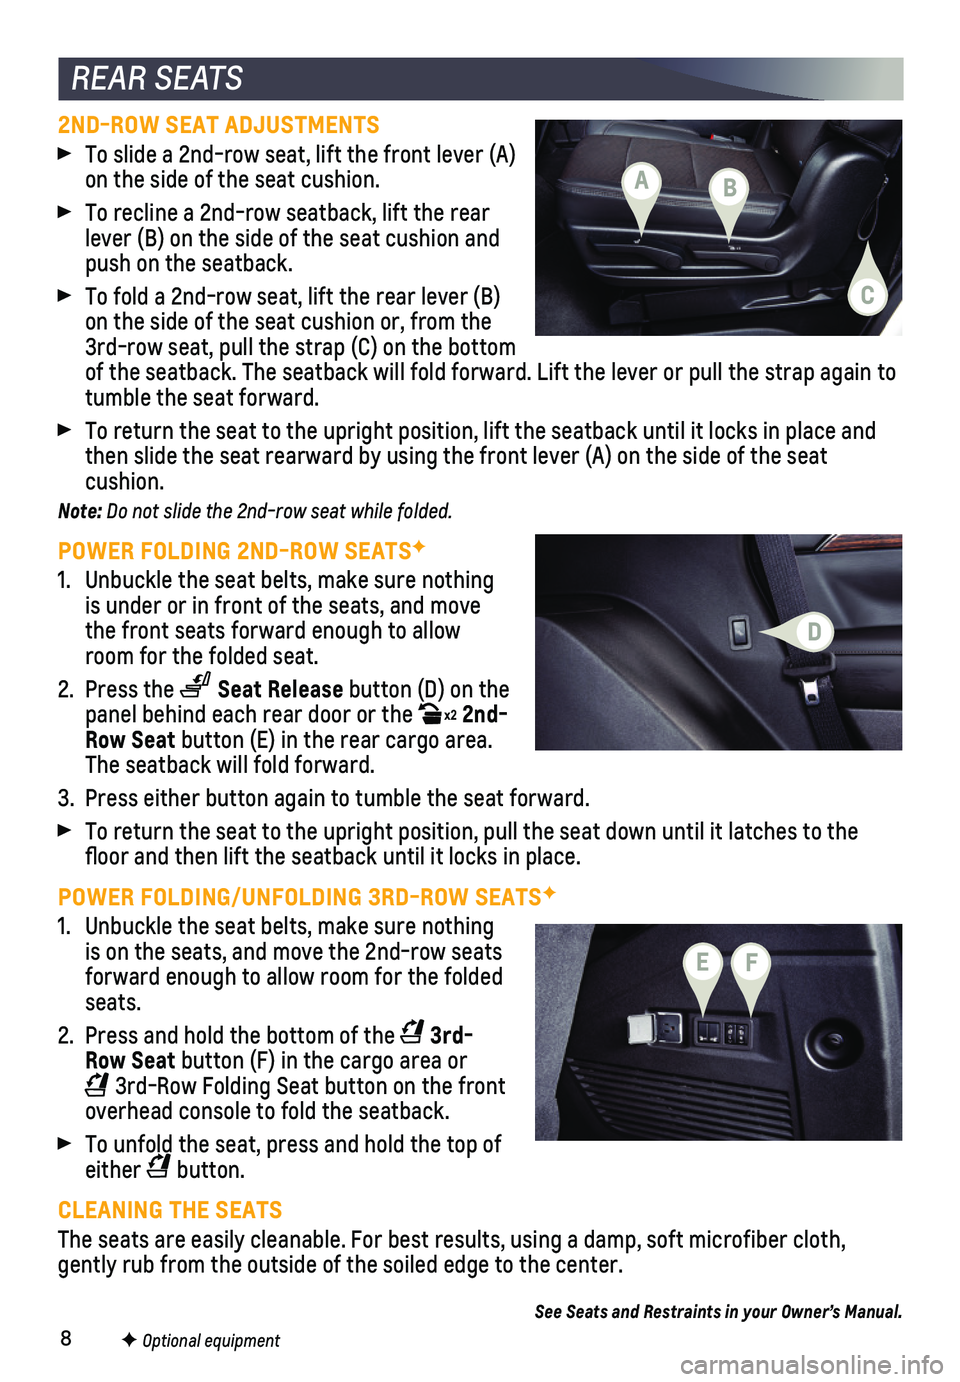 CHEVROLET SUBURBAN 2021  Get To Know Guide 8F Optional equipment
2ND-ROW SEAT ADJUSTMENTS
 To slide a 2nd-row seat, lift the front lever (A) on the side of the seat cushion.
 To recline a 2nd-row seatback, lift the rear lever (B) on the side o